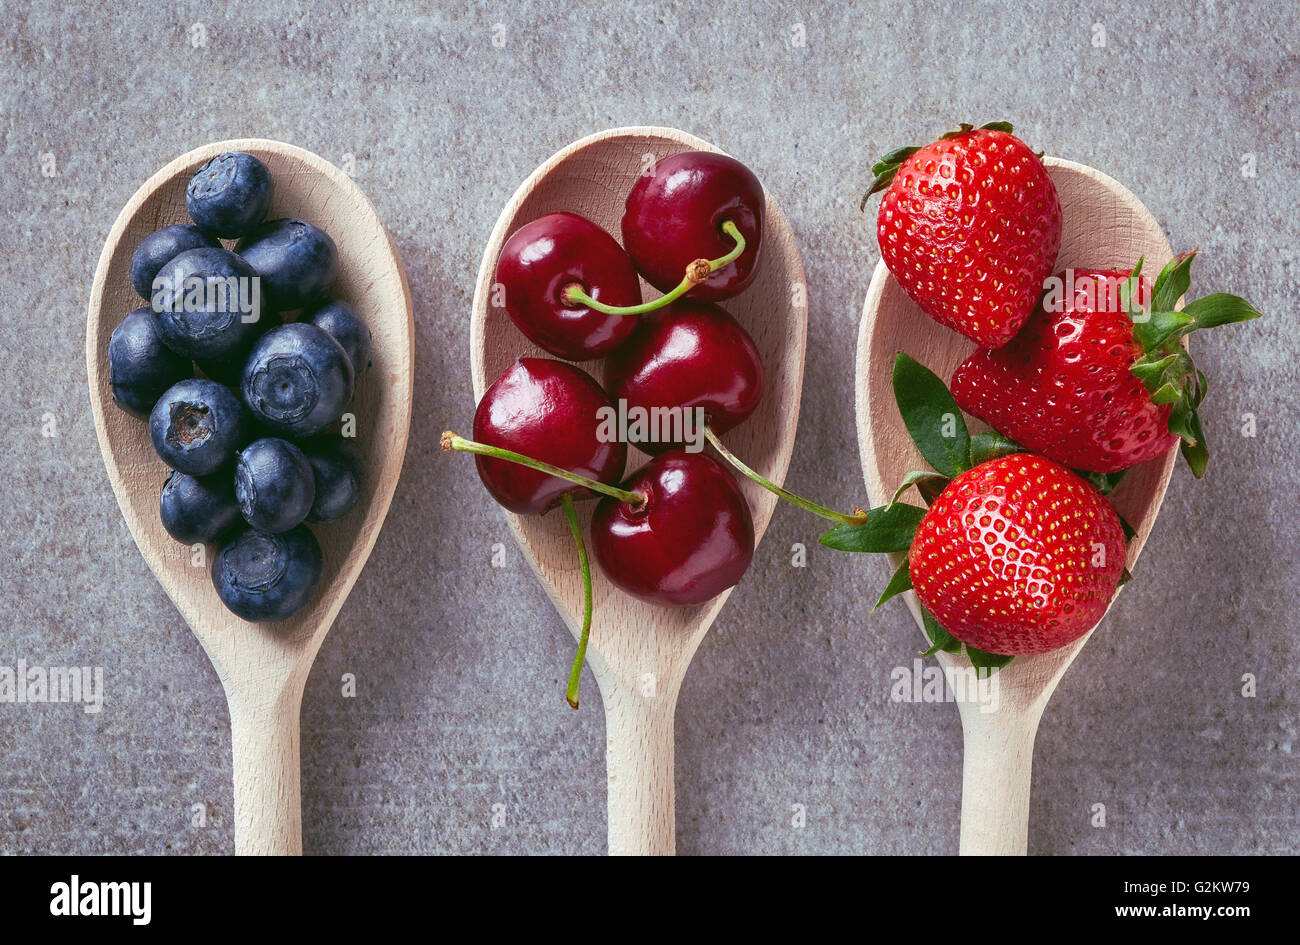 Blueberries, cherries and strawberries in wooden spoons on stone table, top view Stock Photo